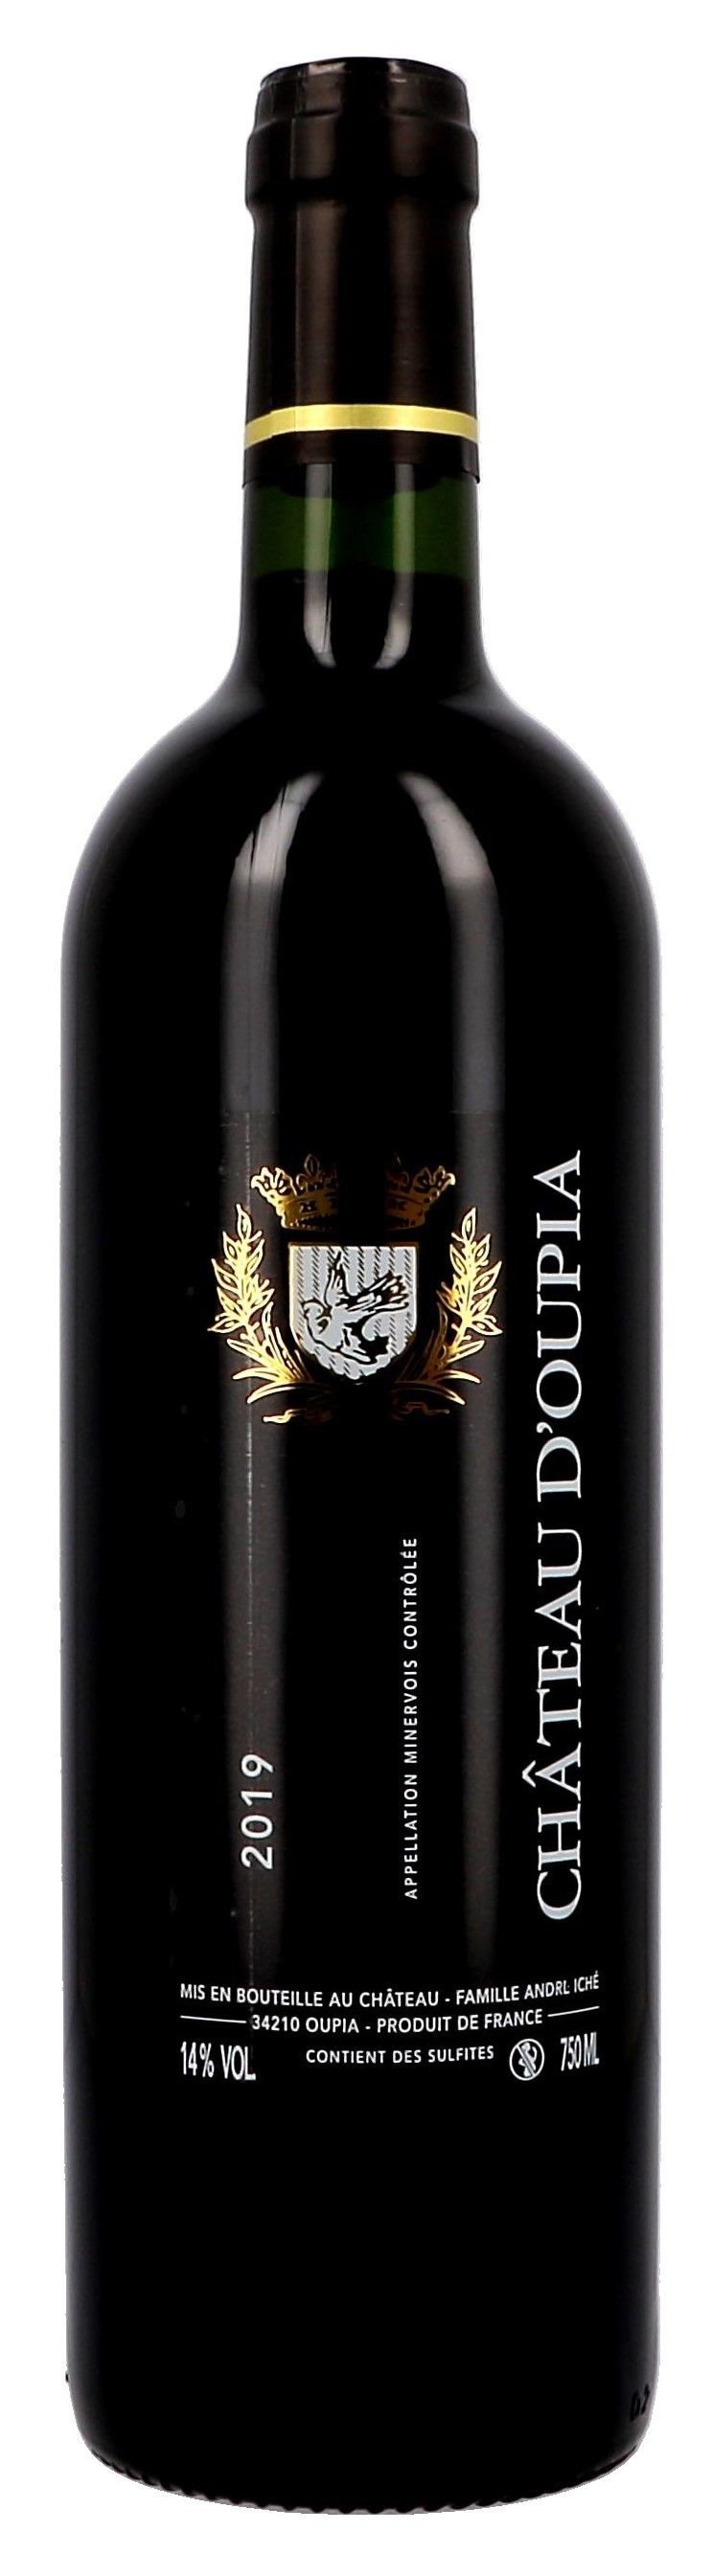 Minervois Tradition Chateau d'Oupia 75cl 2019 Famille Iché